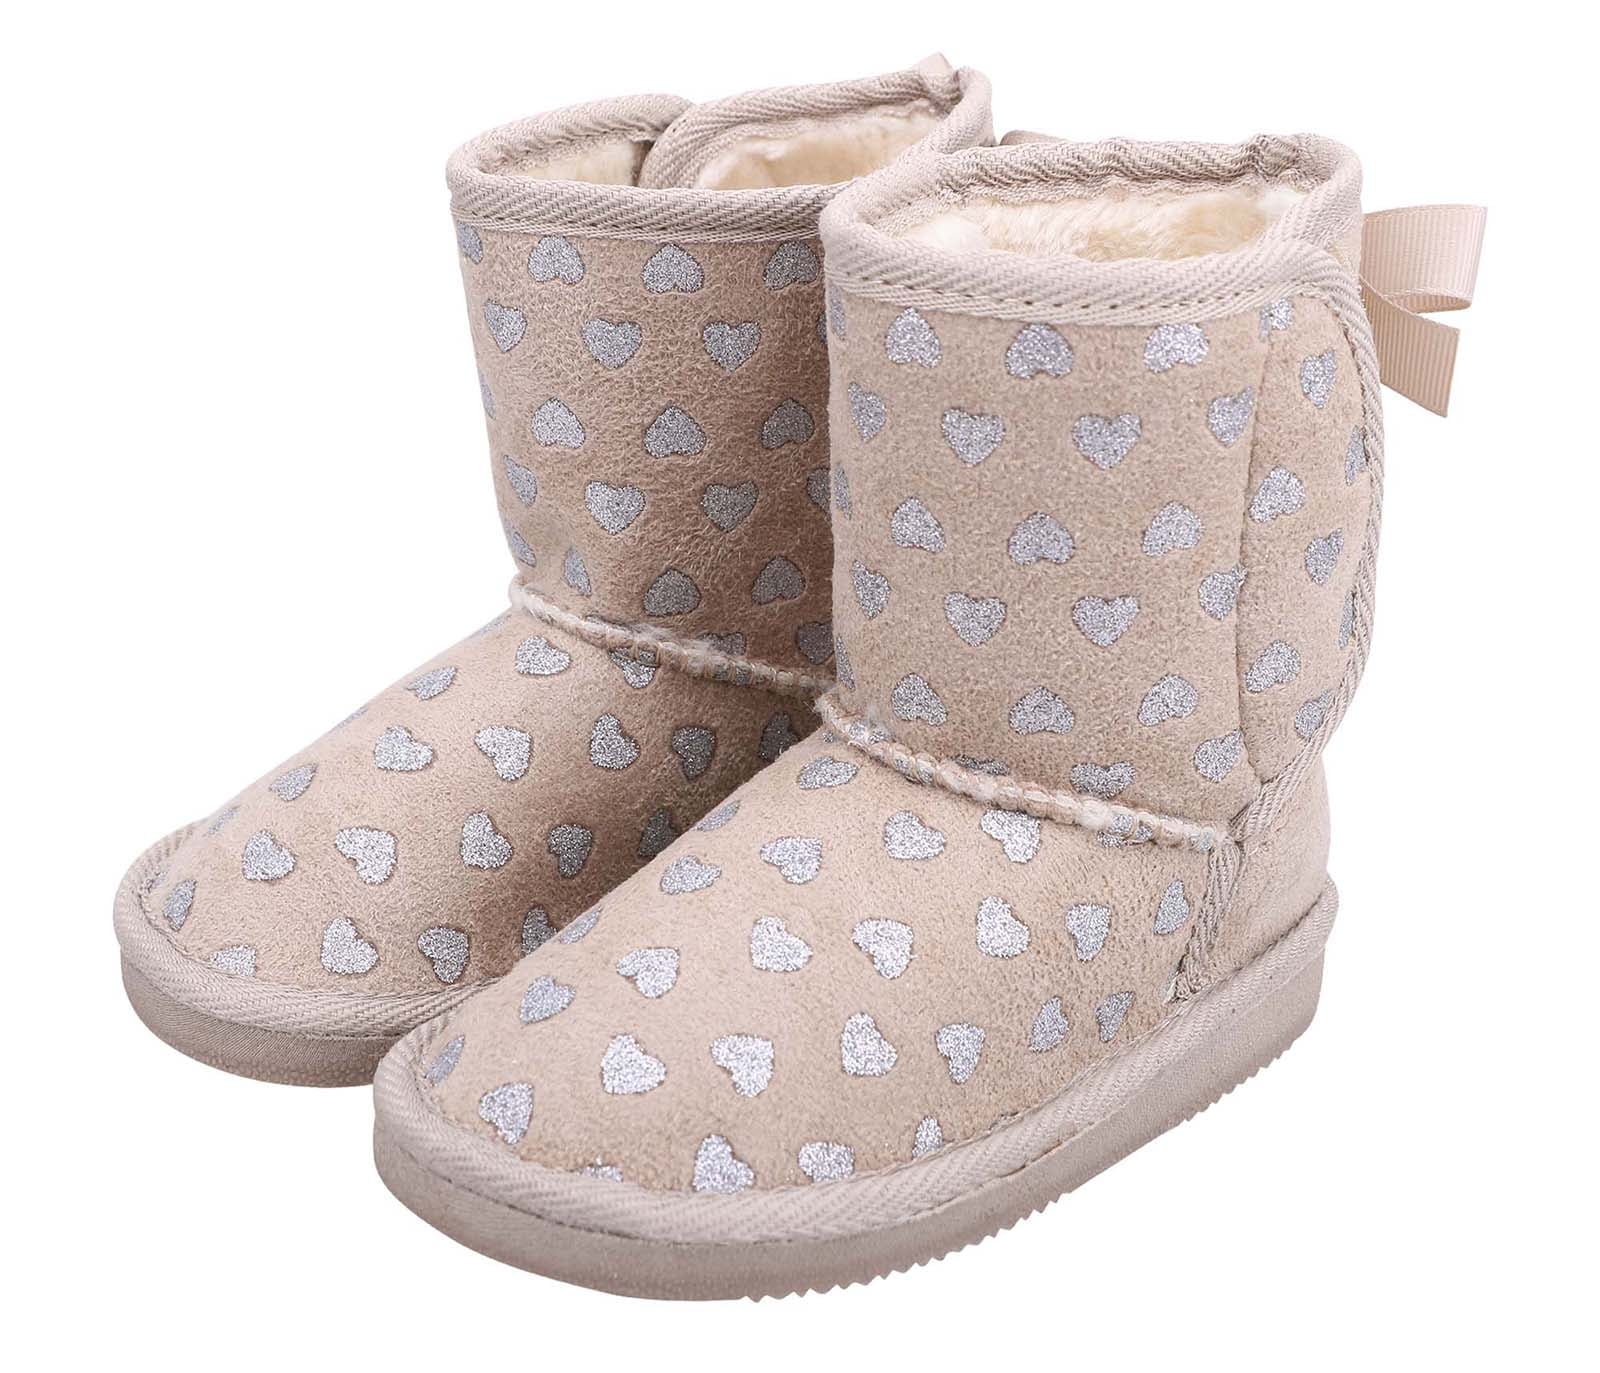 New Classic Baby Round Toe Side Button Faux Fur Boots Toddler Shoe Size 3 to 8 